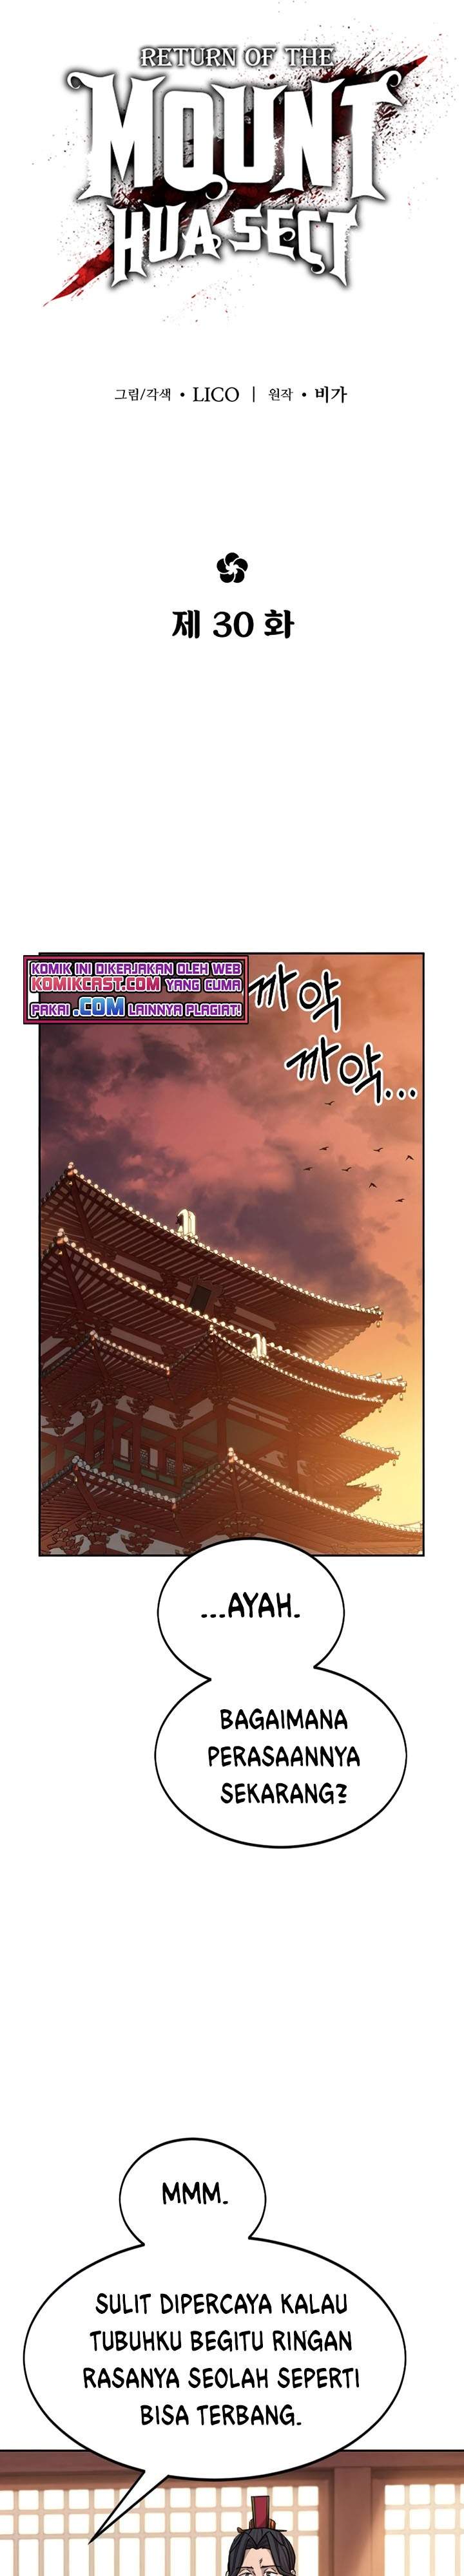 Return of the Flowery Mountain Sect Chapter 30